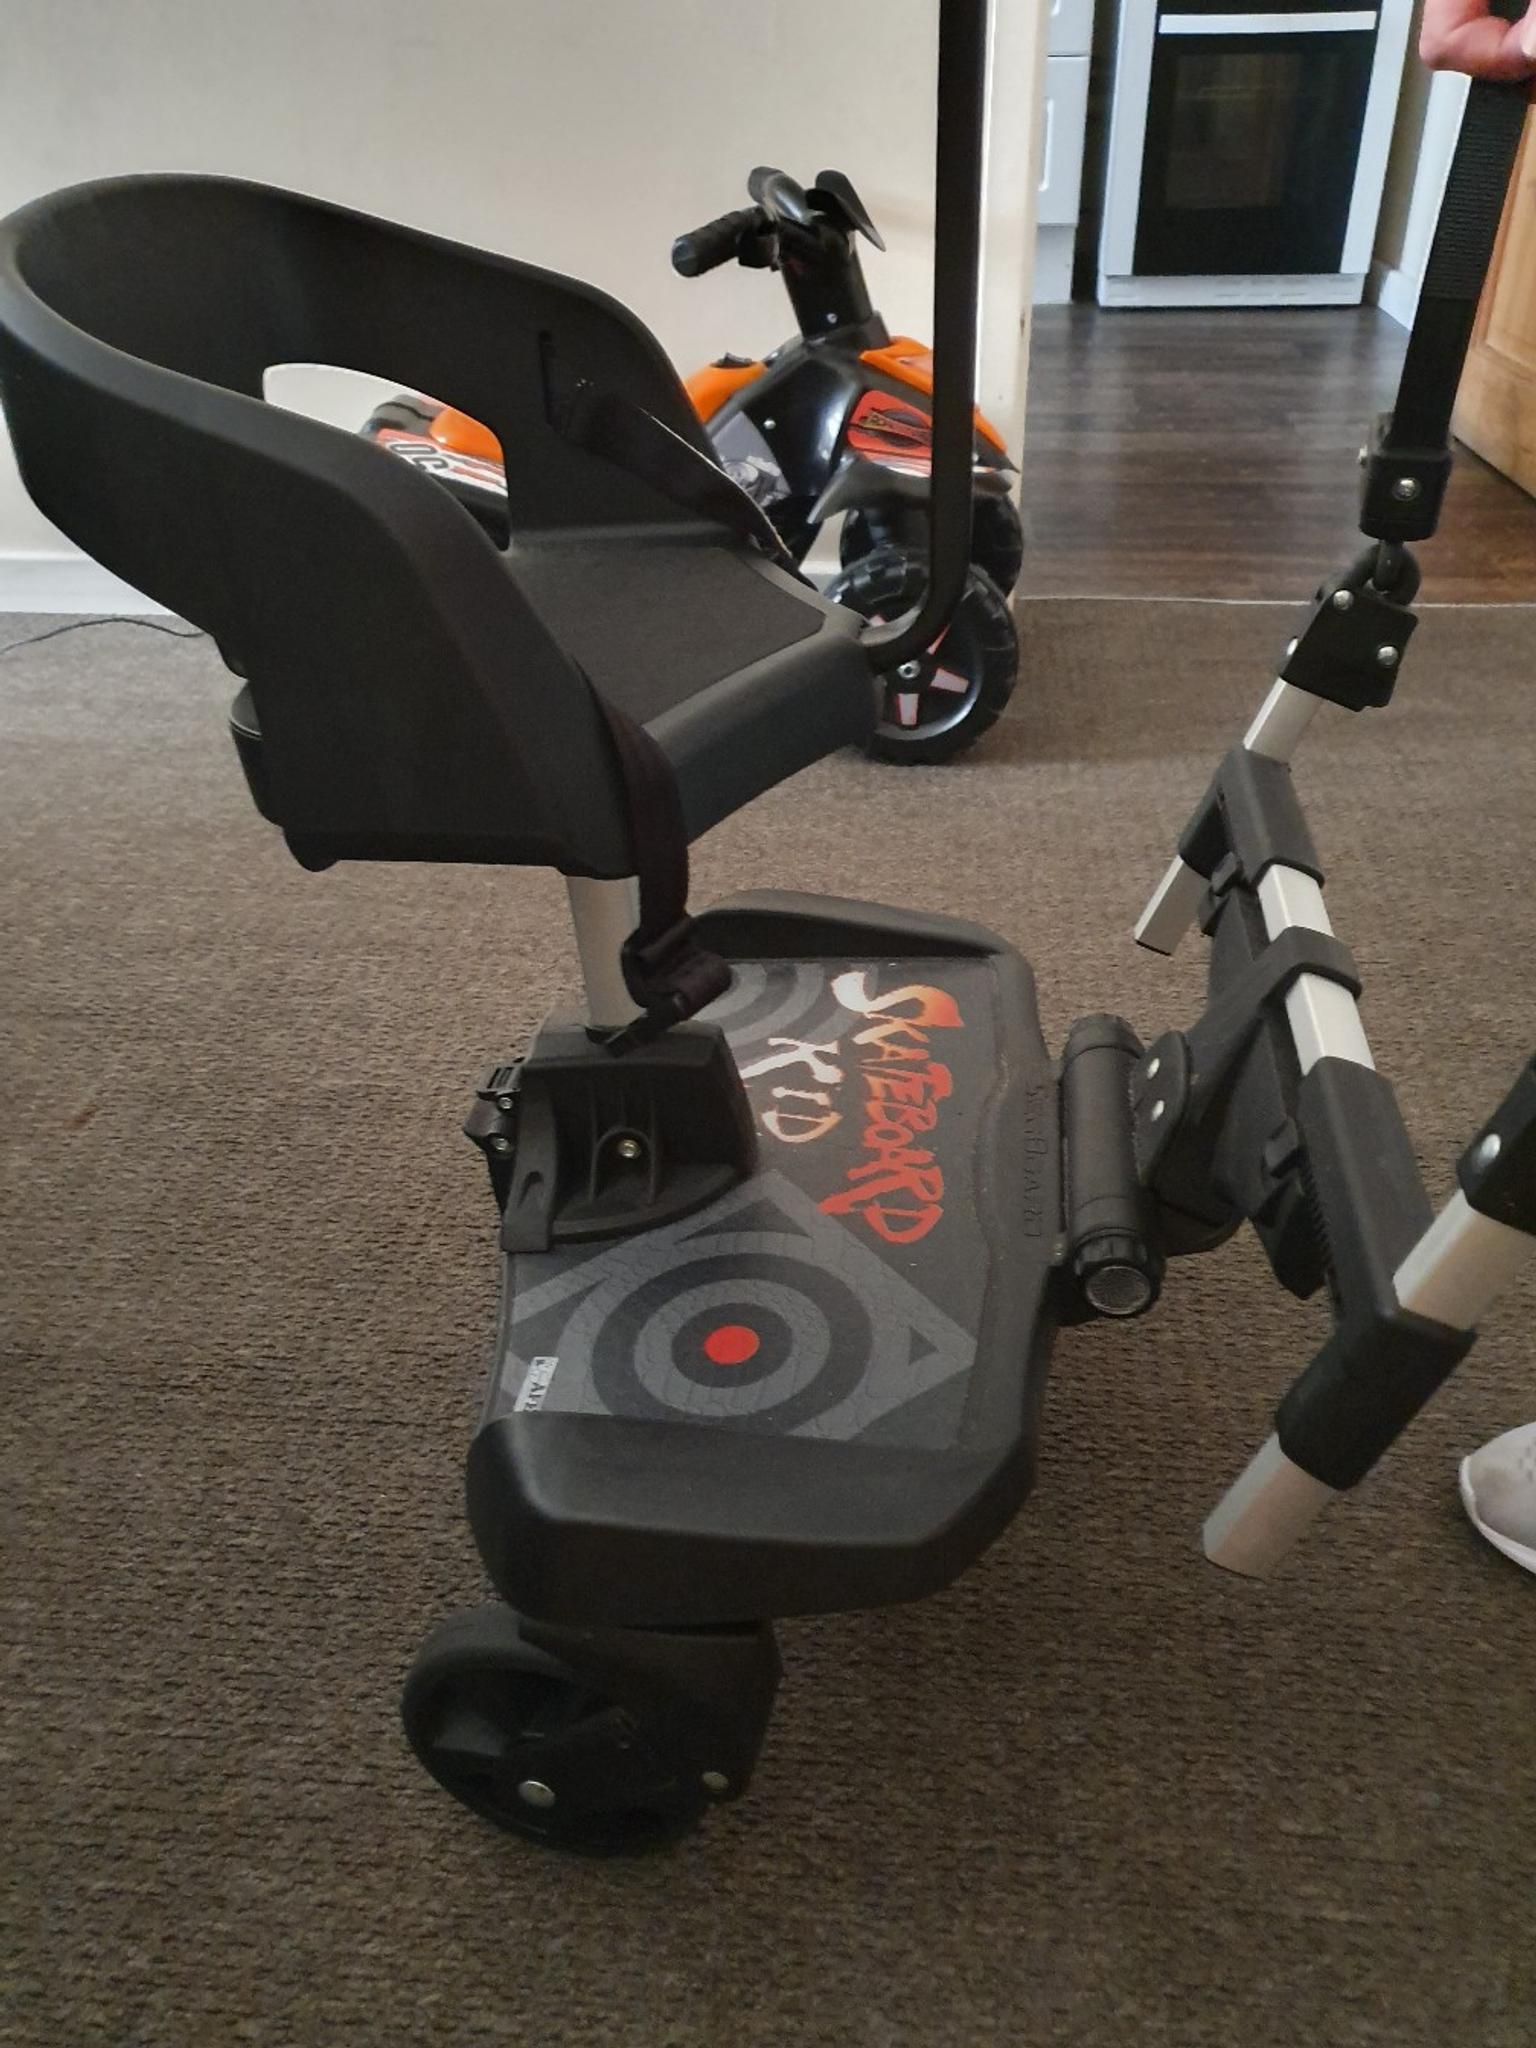 how much does the uppababy vista weight